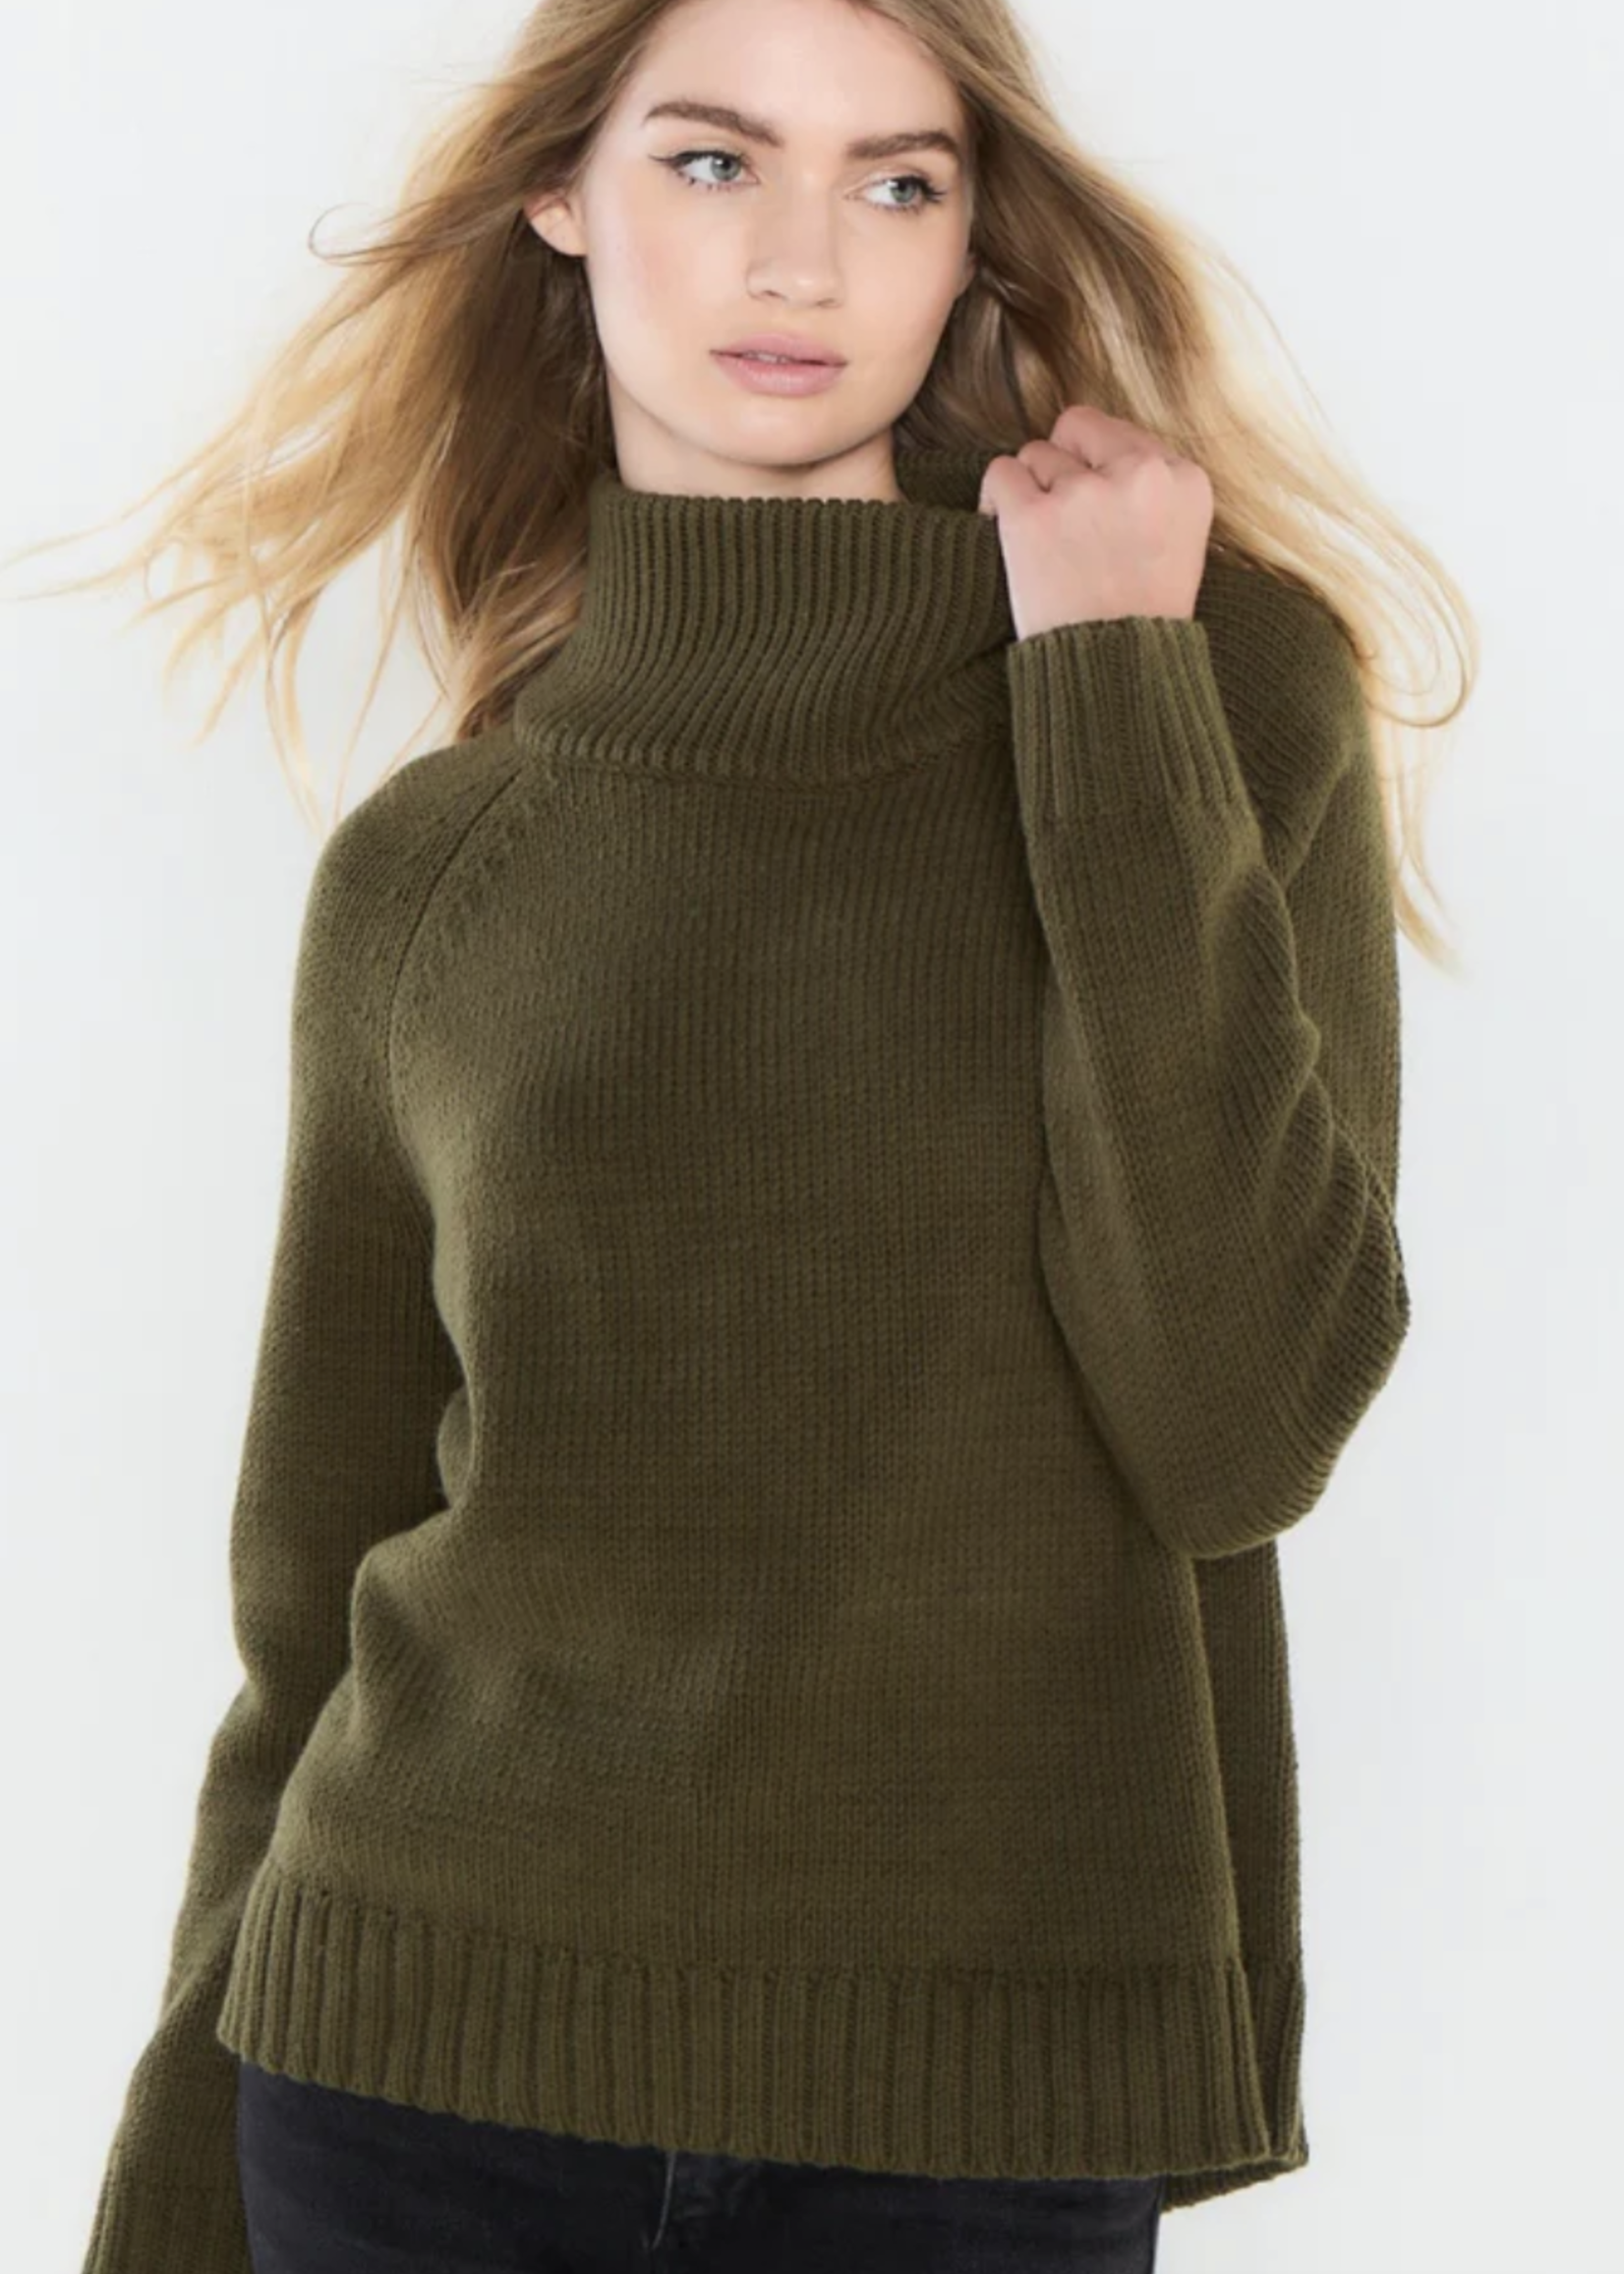 LISA TODD LOVE IS BACK SWEATER